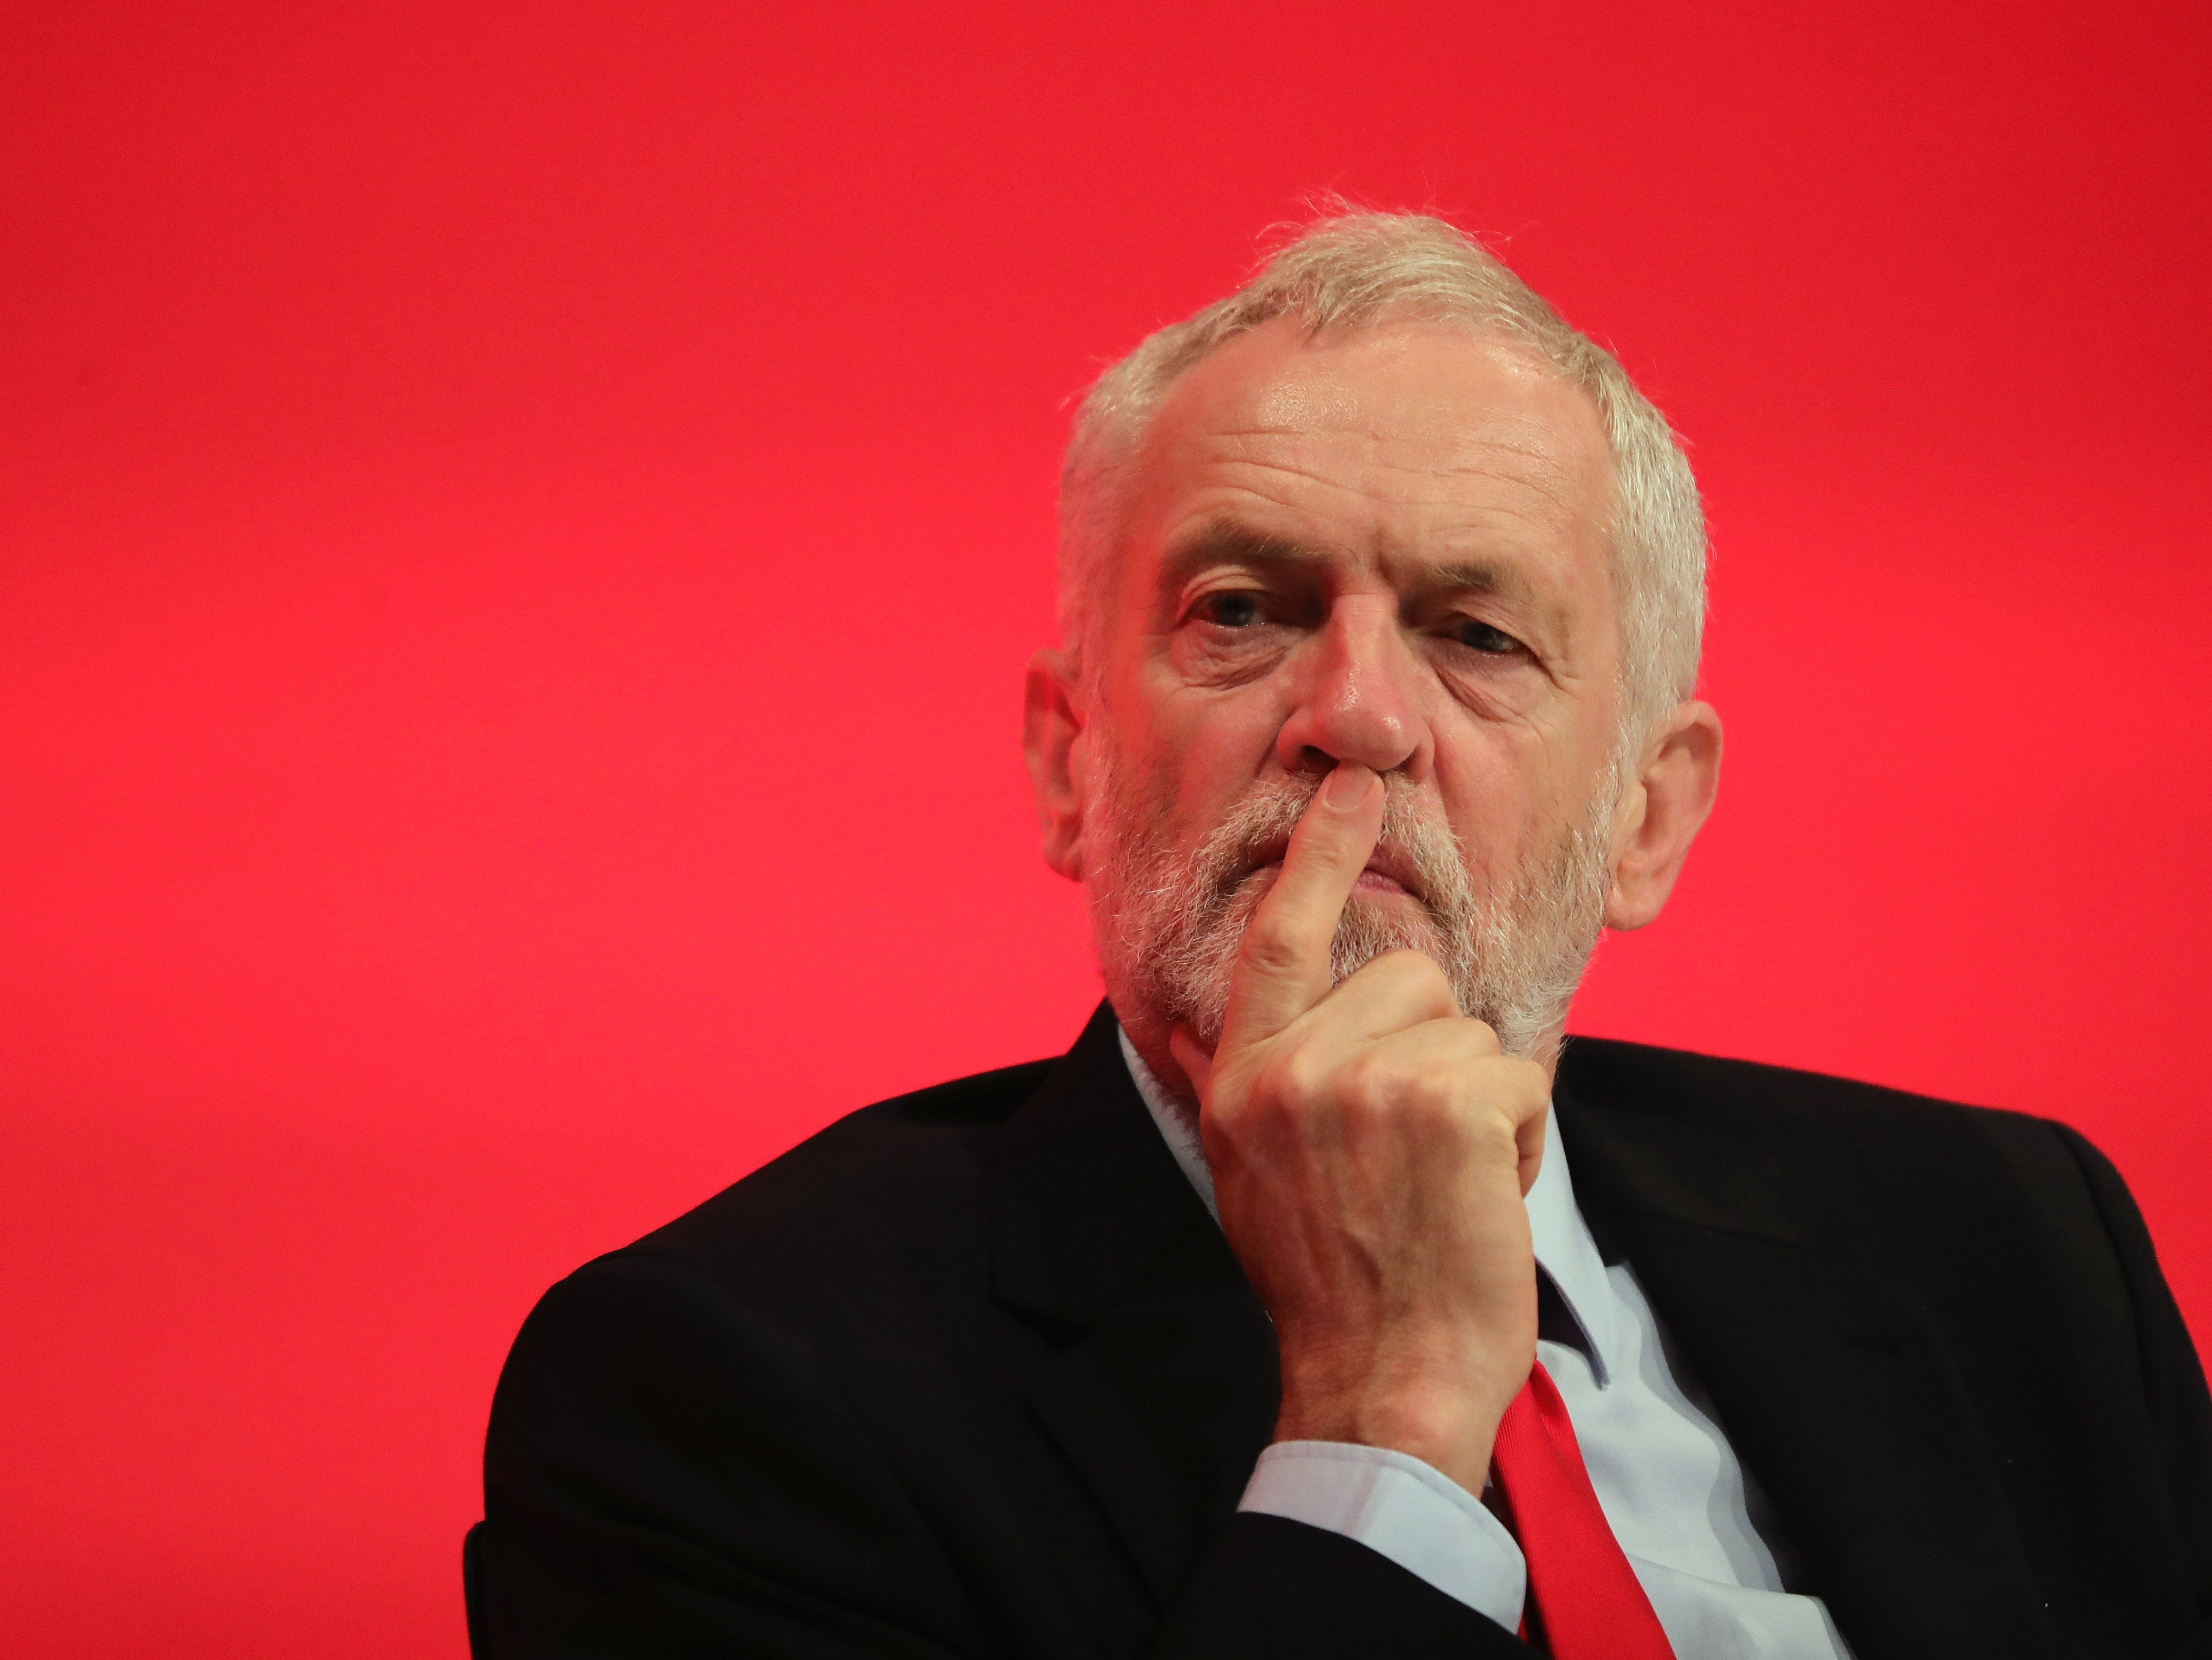 Corbyn says claims have not been exaggerated